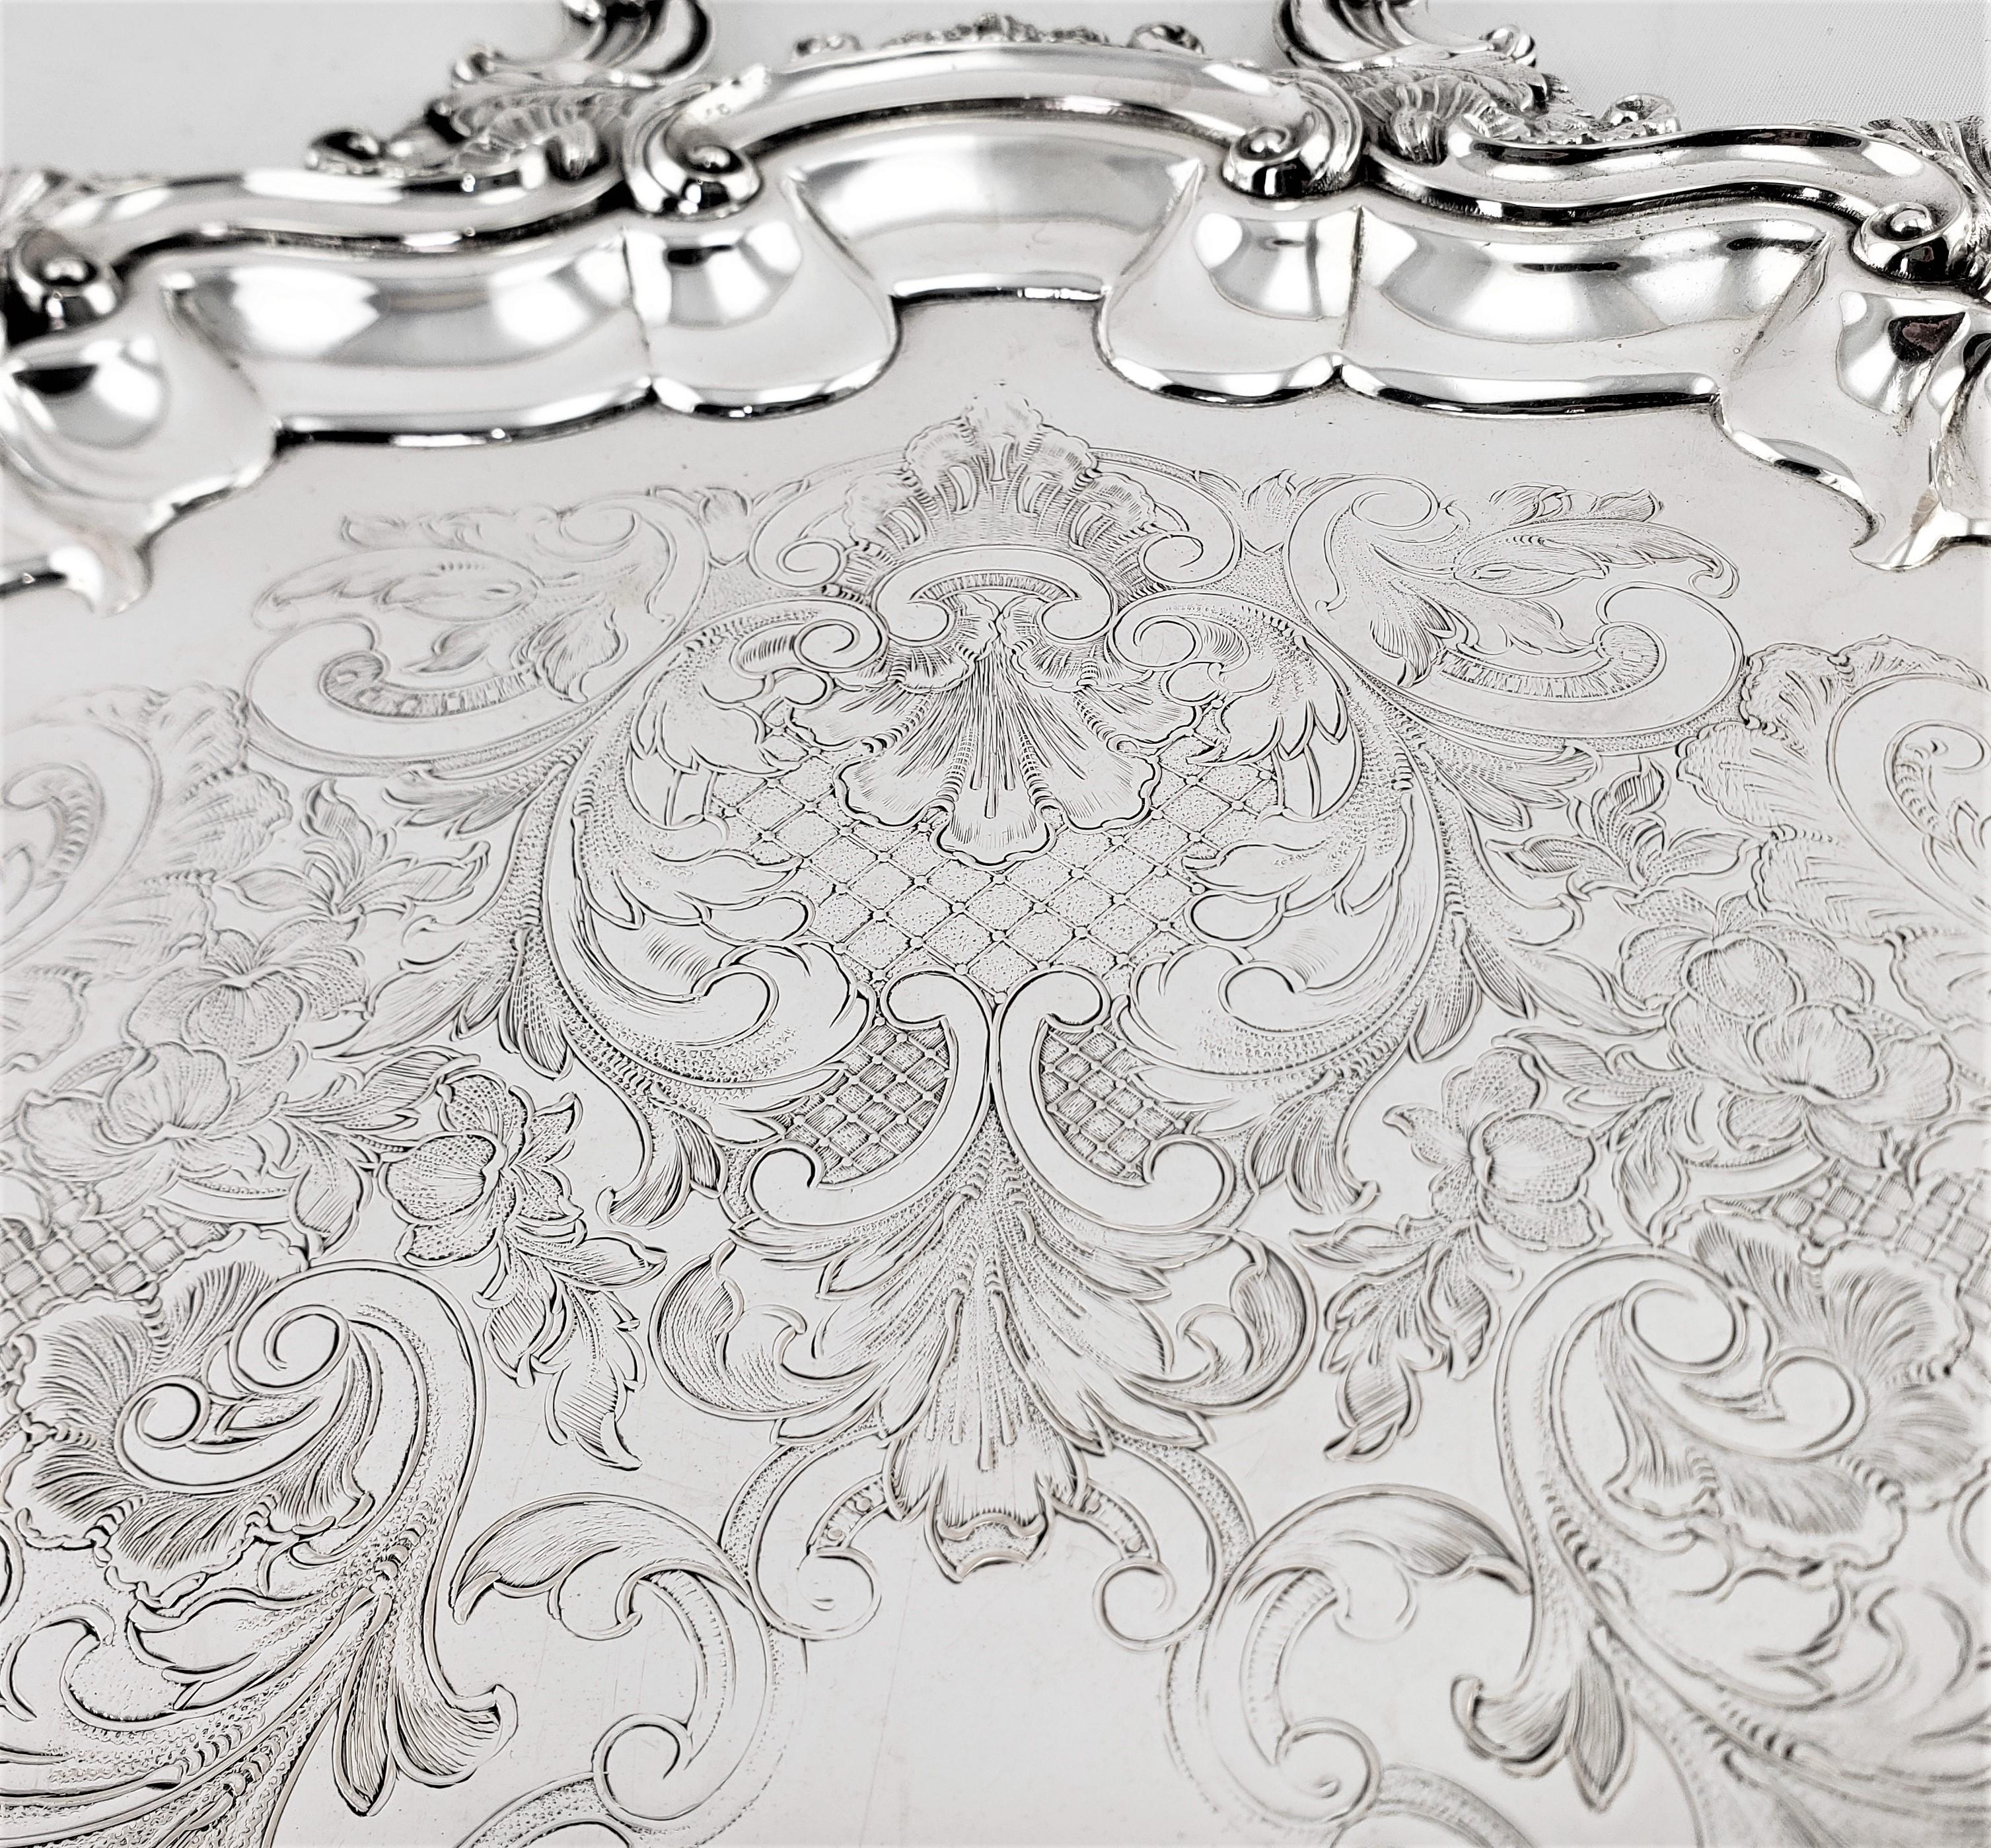 Large Antique Oval Silver Plated Serving Tray with Ornate Floral Decoration 3